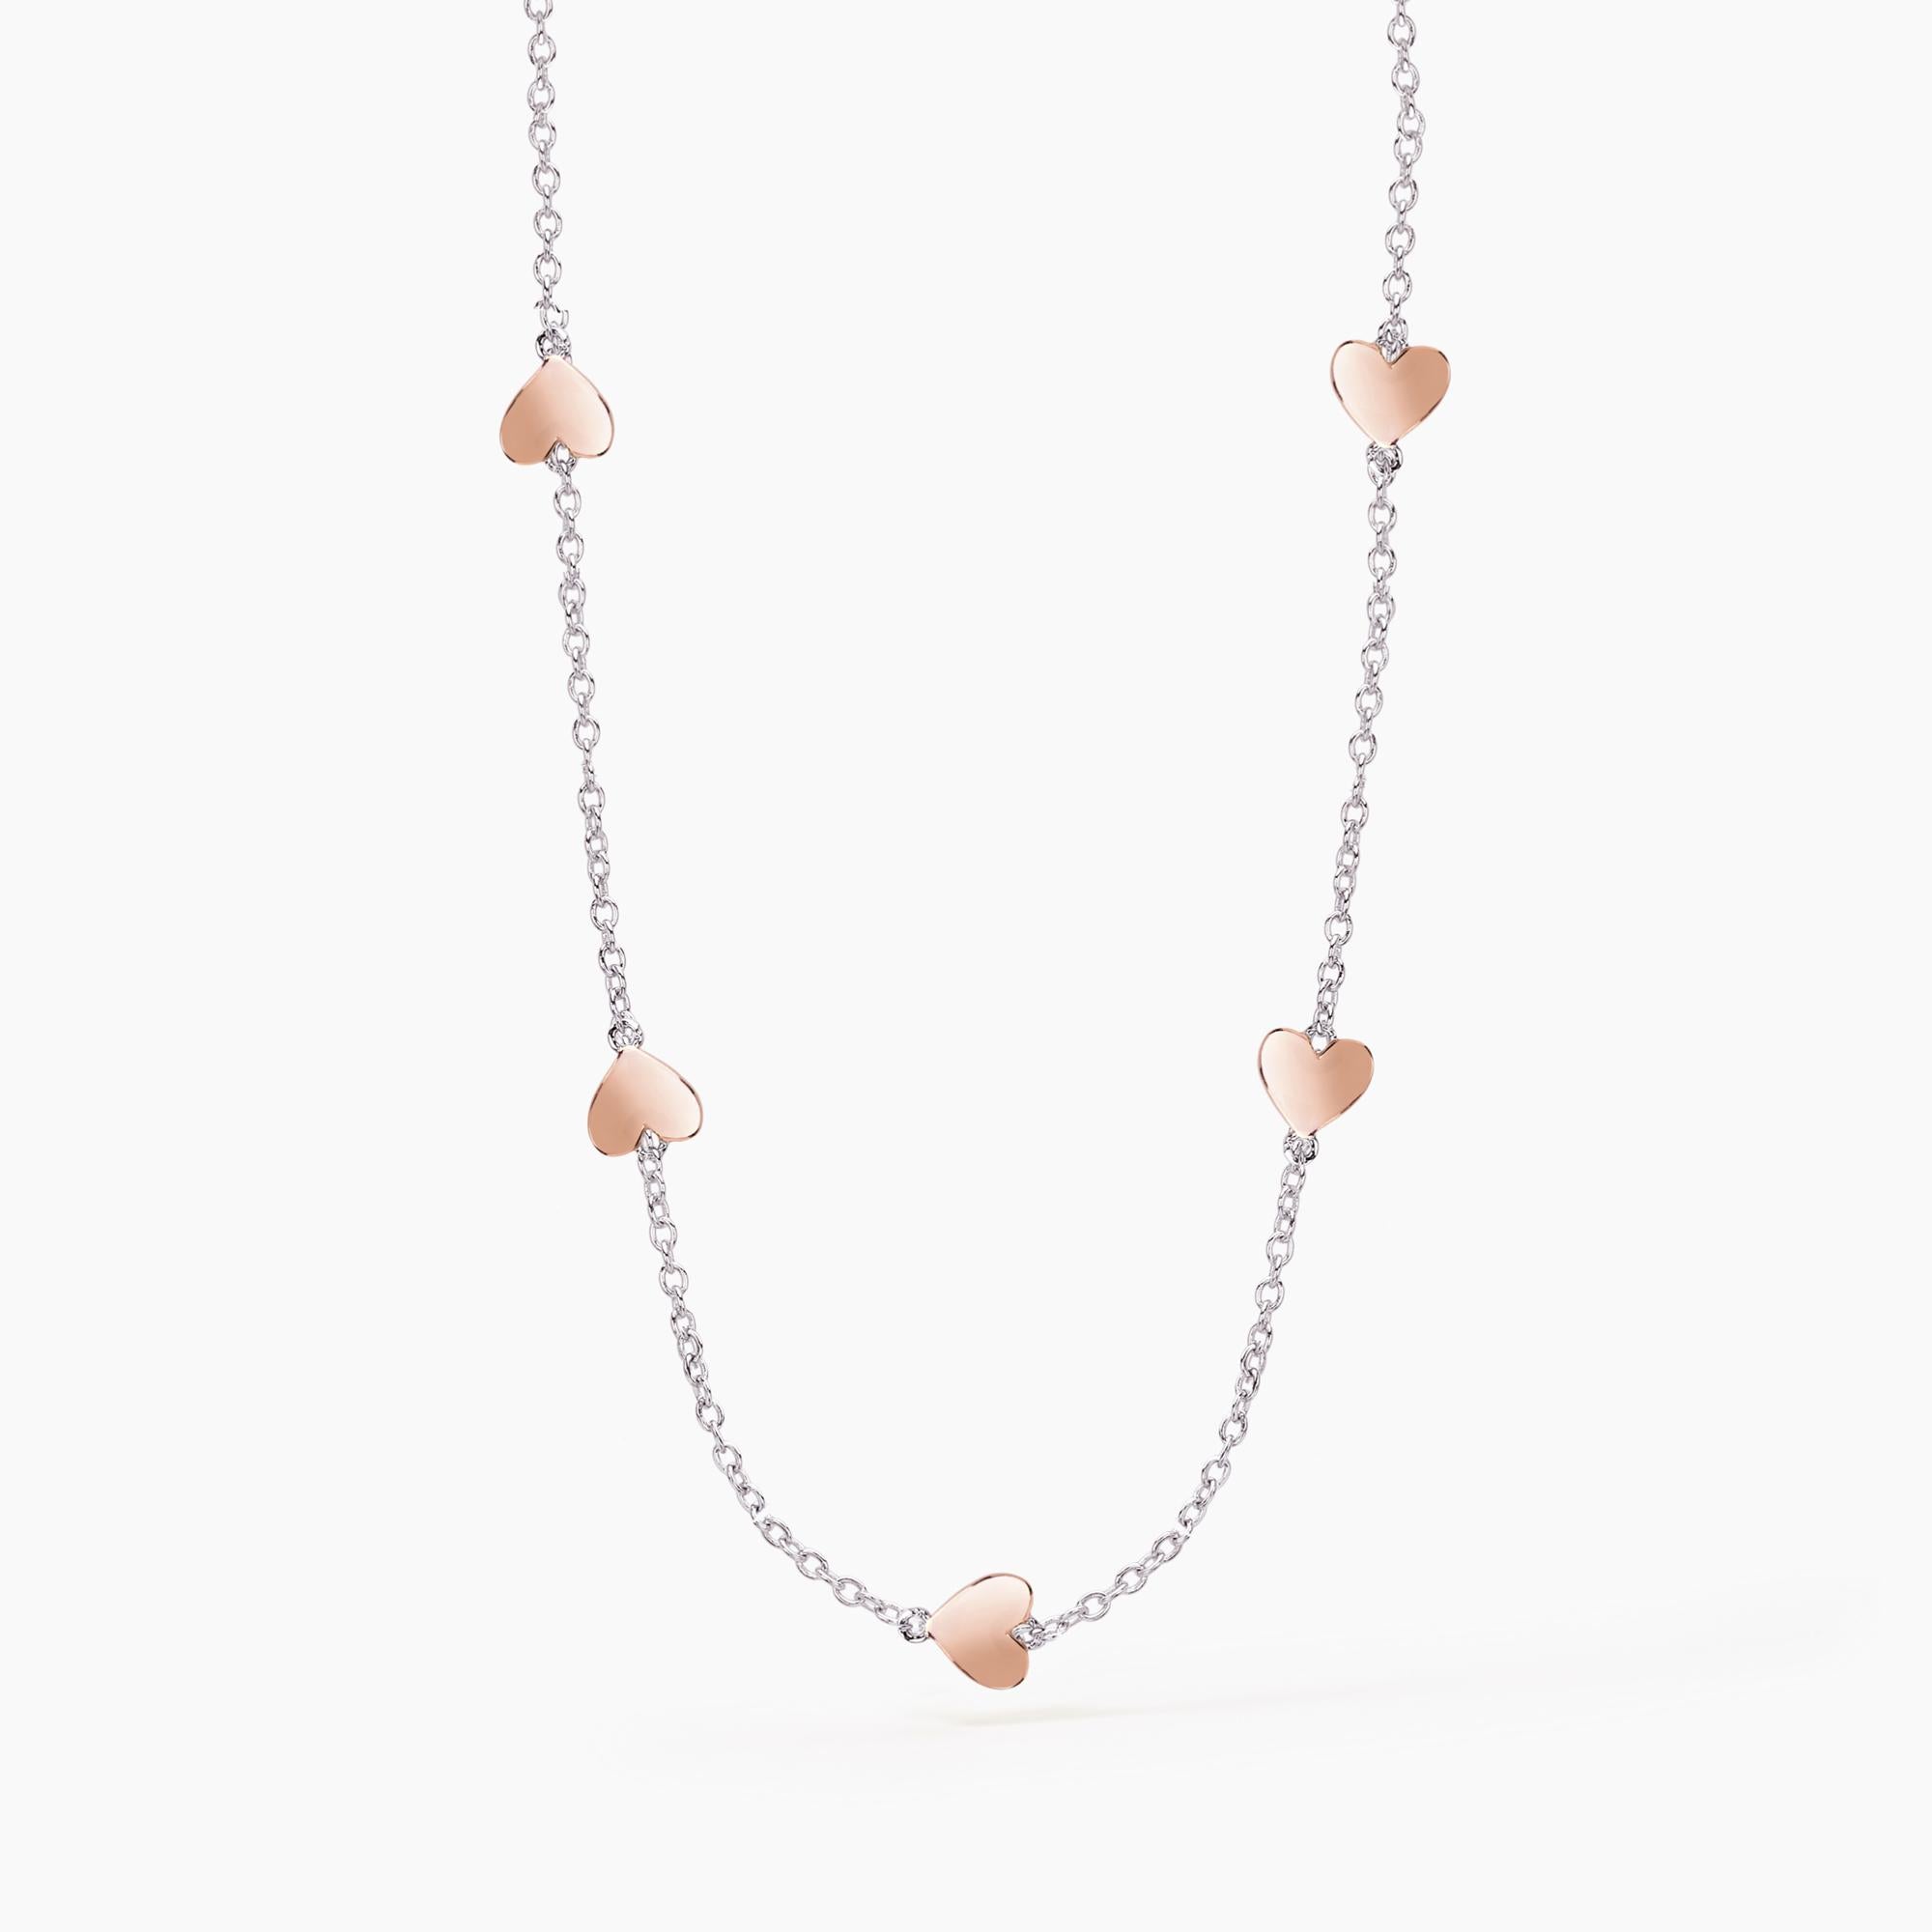 Mabina Femme - Collier NARCISO - 553219